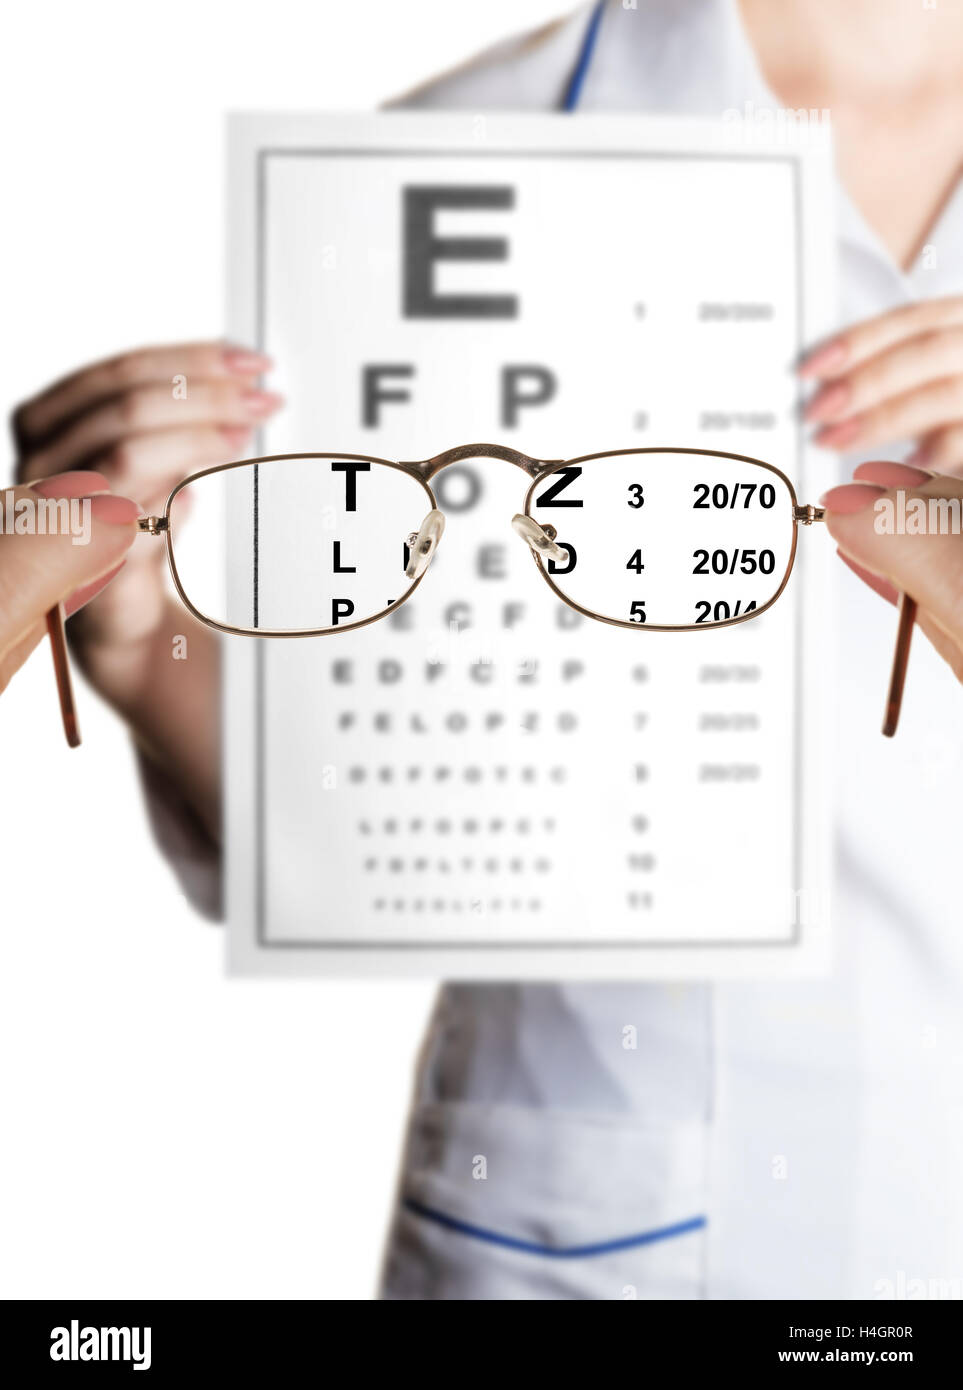 glasses on a background doctor ophthalmologist checking eyesight Stock Photo